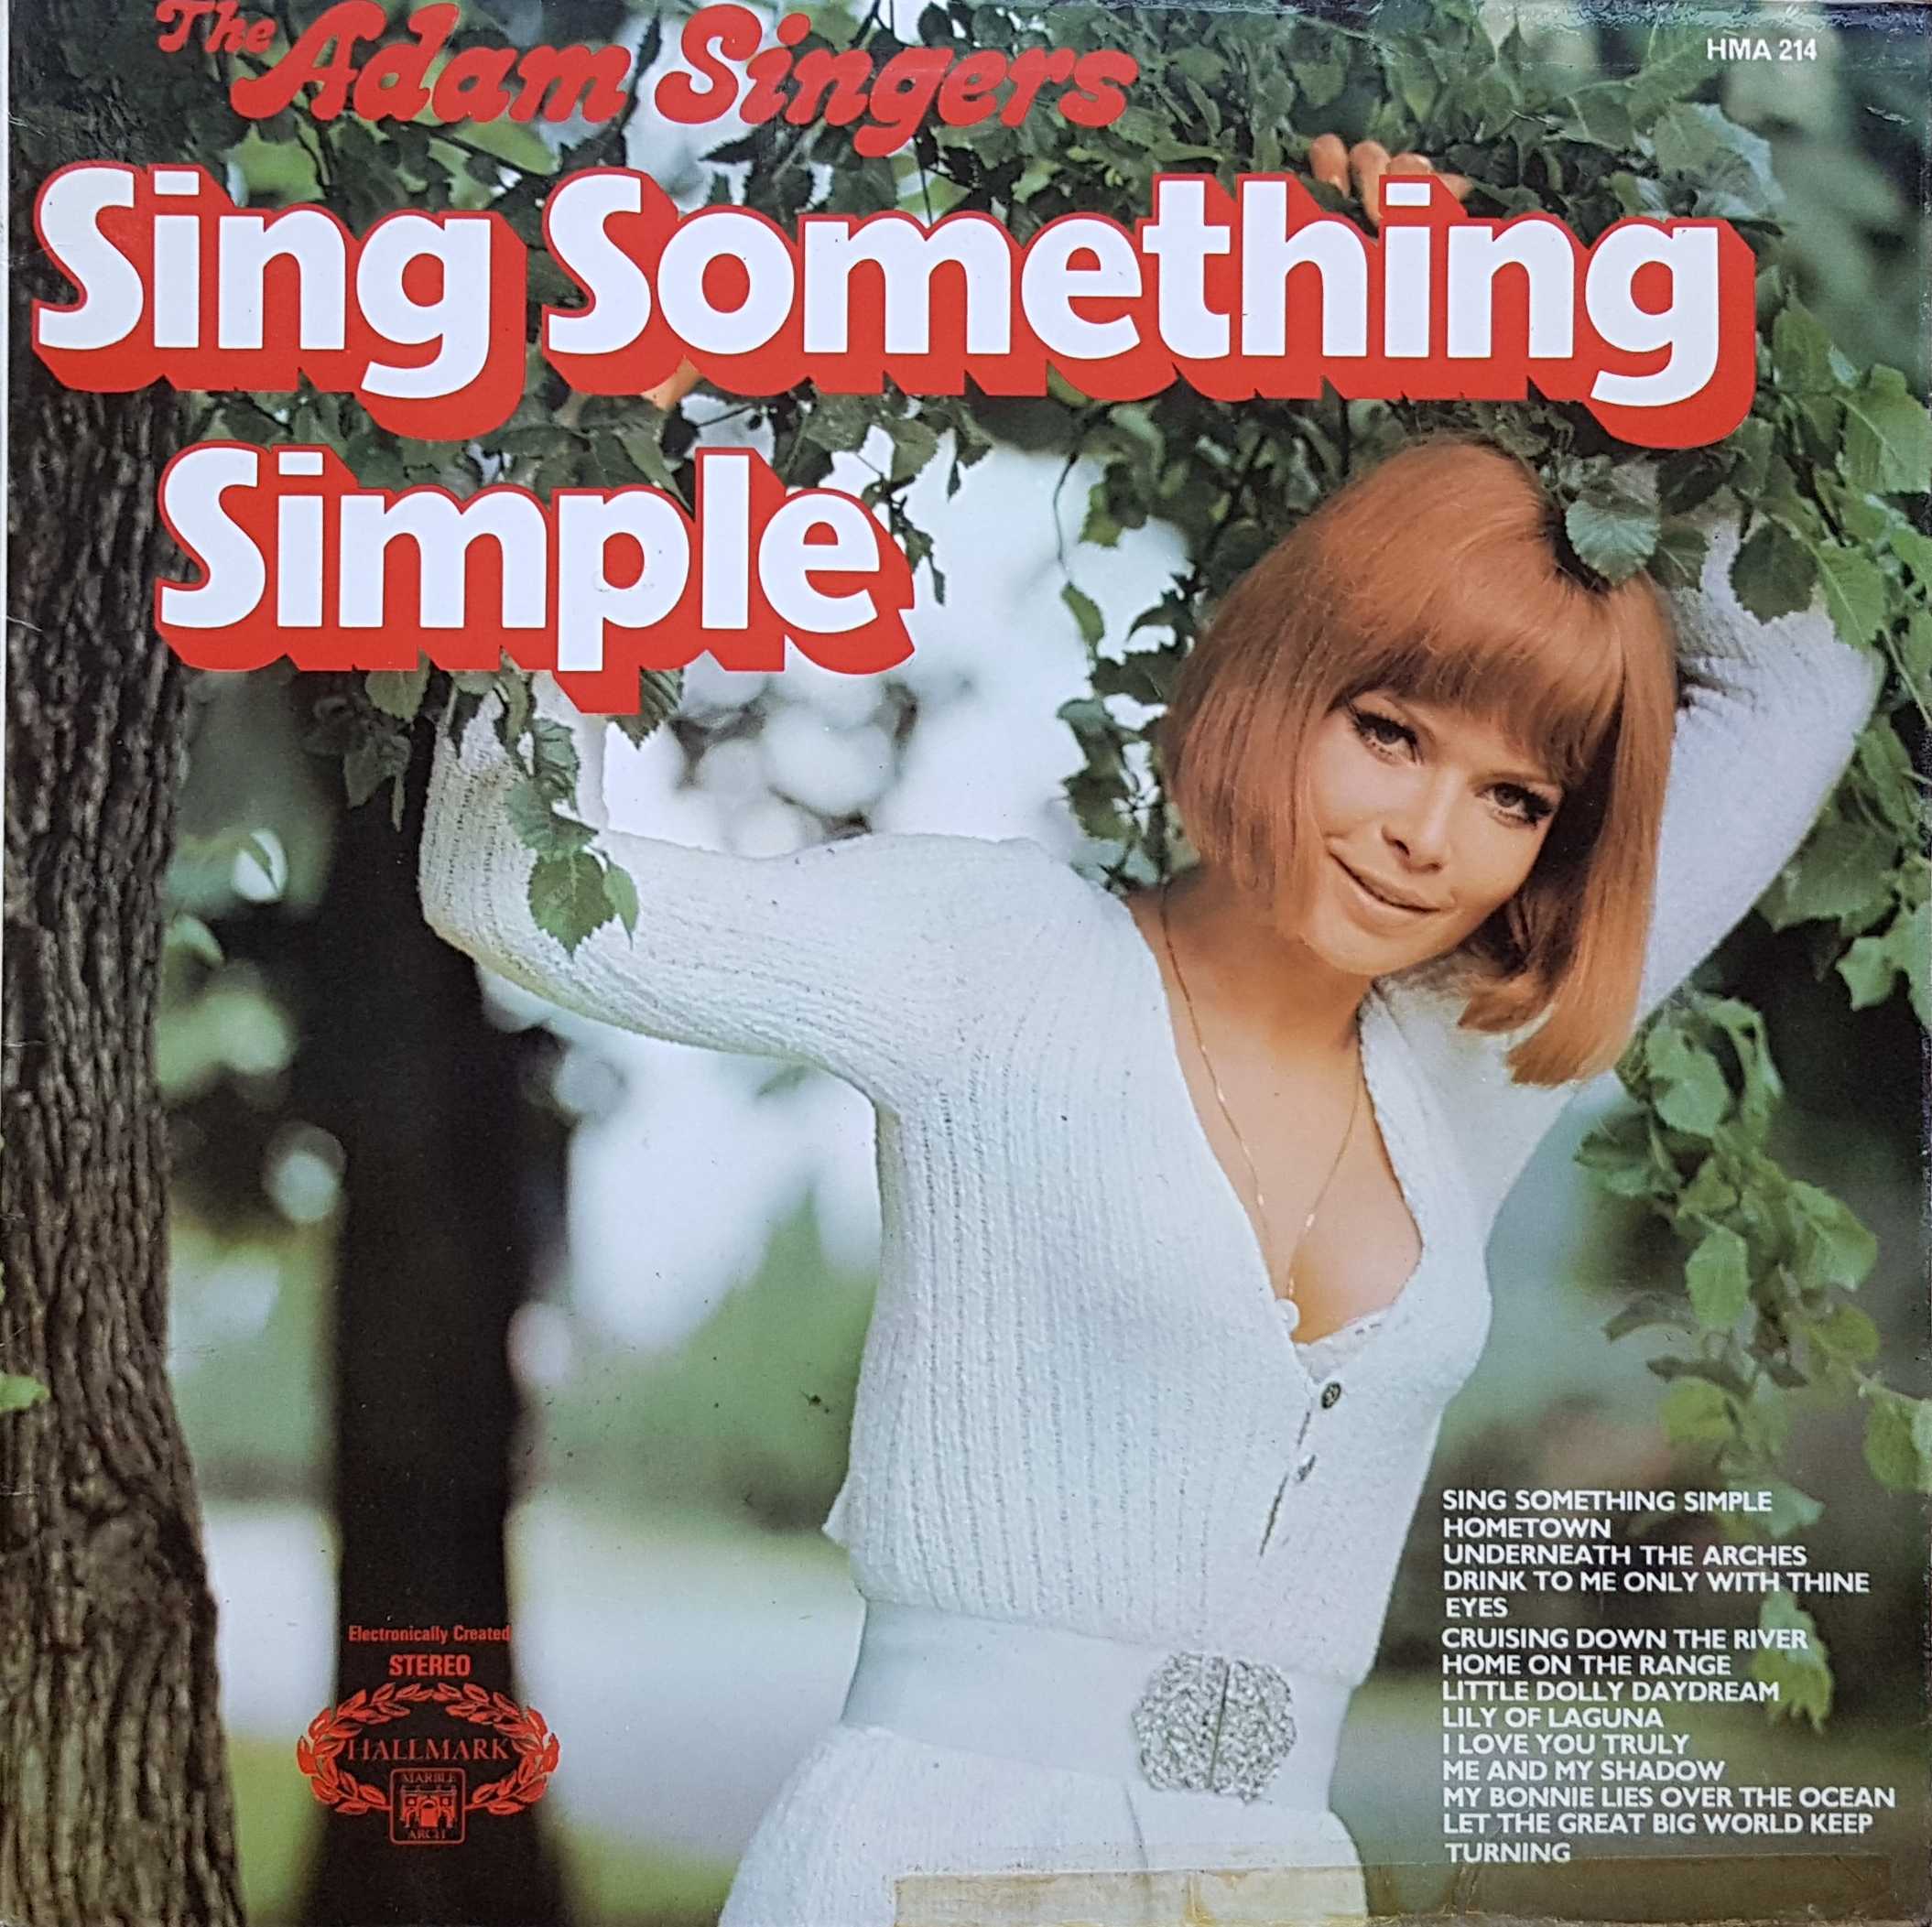 Picture of Sing something simple by artist Various from the BBC albums - Records and Tapes library